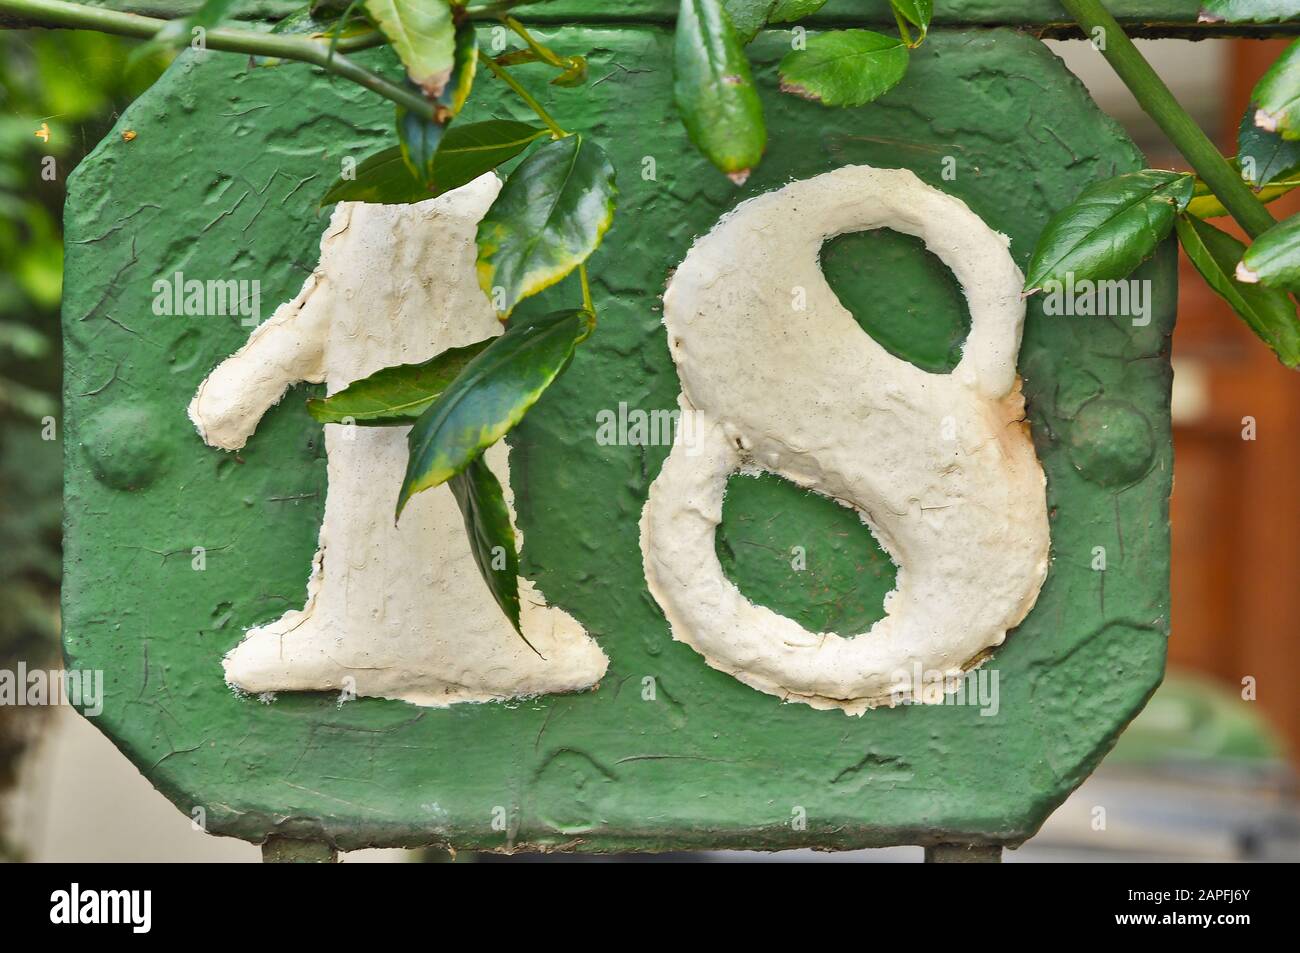 A house number plaque, showing the number eighteen (18) Stock Photo